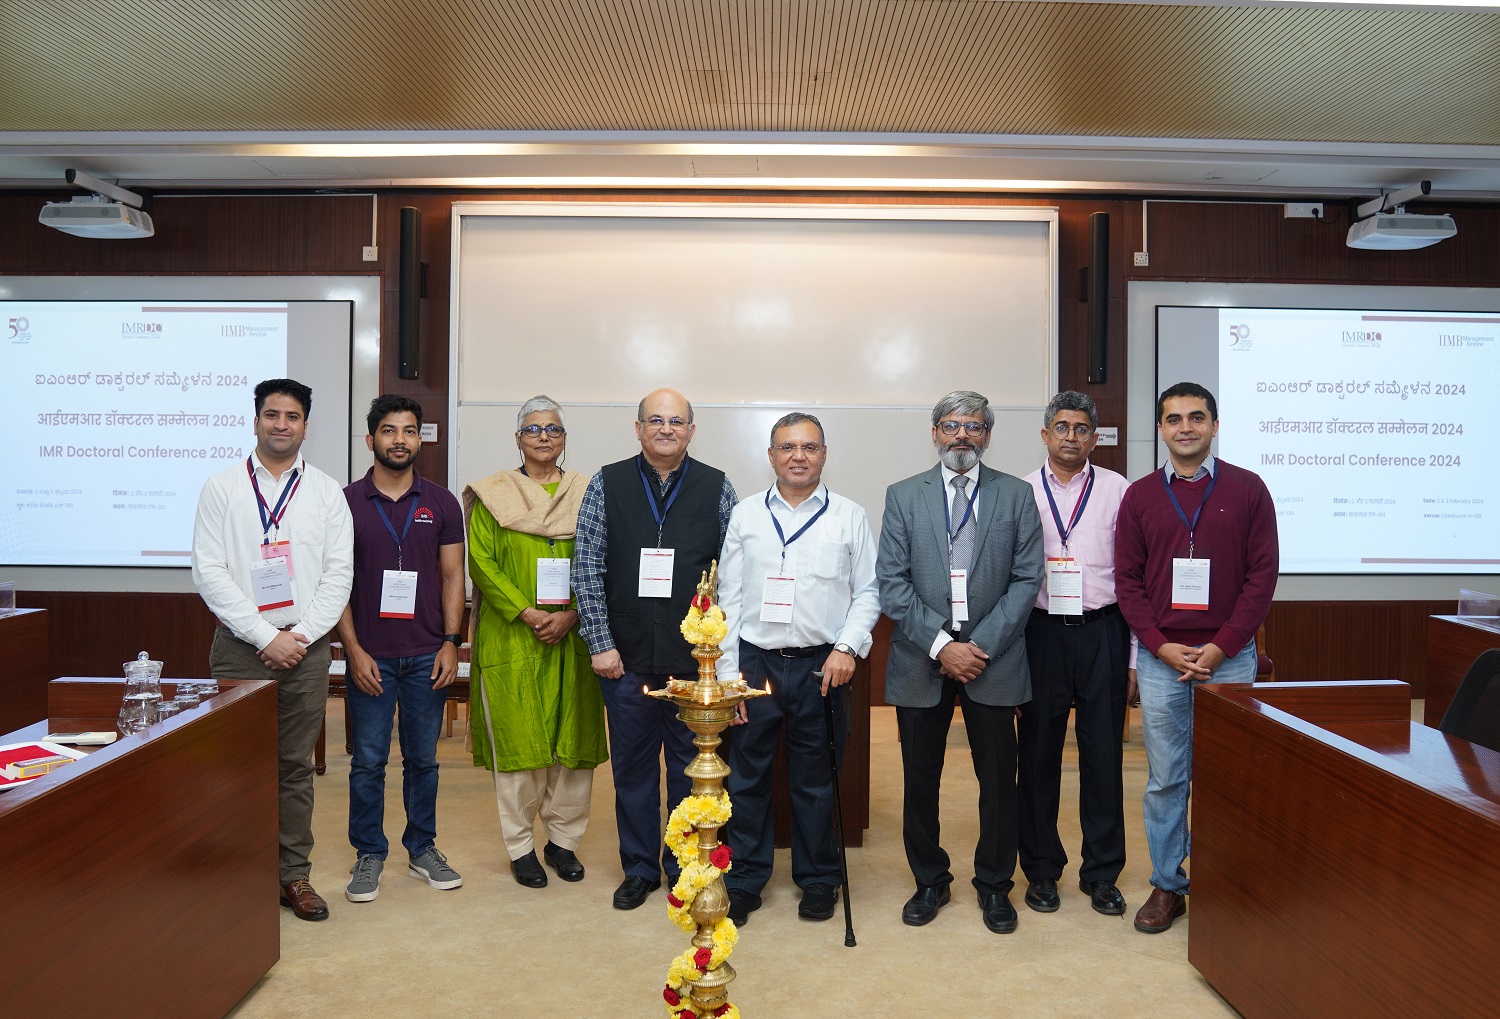 Professor Sanjay Kallapur, Accounting, Indian School of Business, lights the ceremonial lamp to inaugurate the IMR Doctoral Conference (IMRDC) organized by IIMB Management Review (IMR) and the Office of the Doctoral Programme on 2nd February 2024